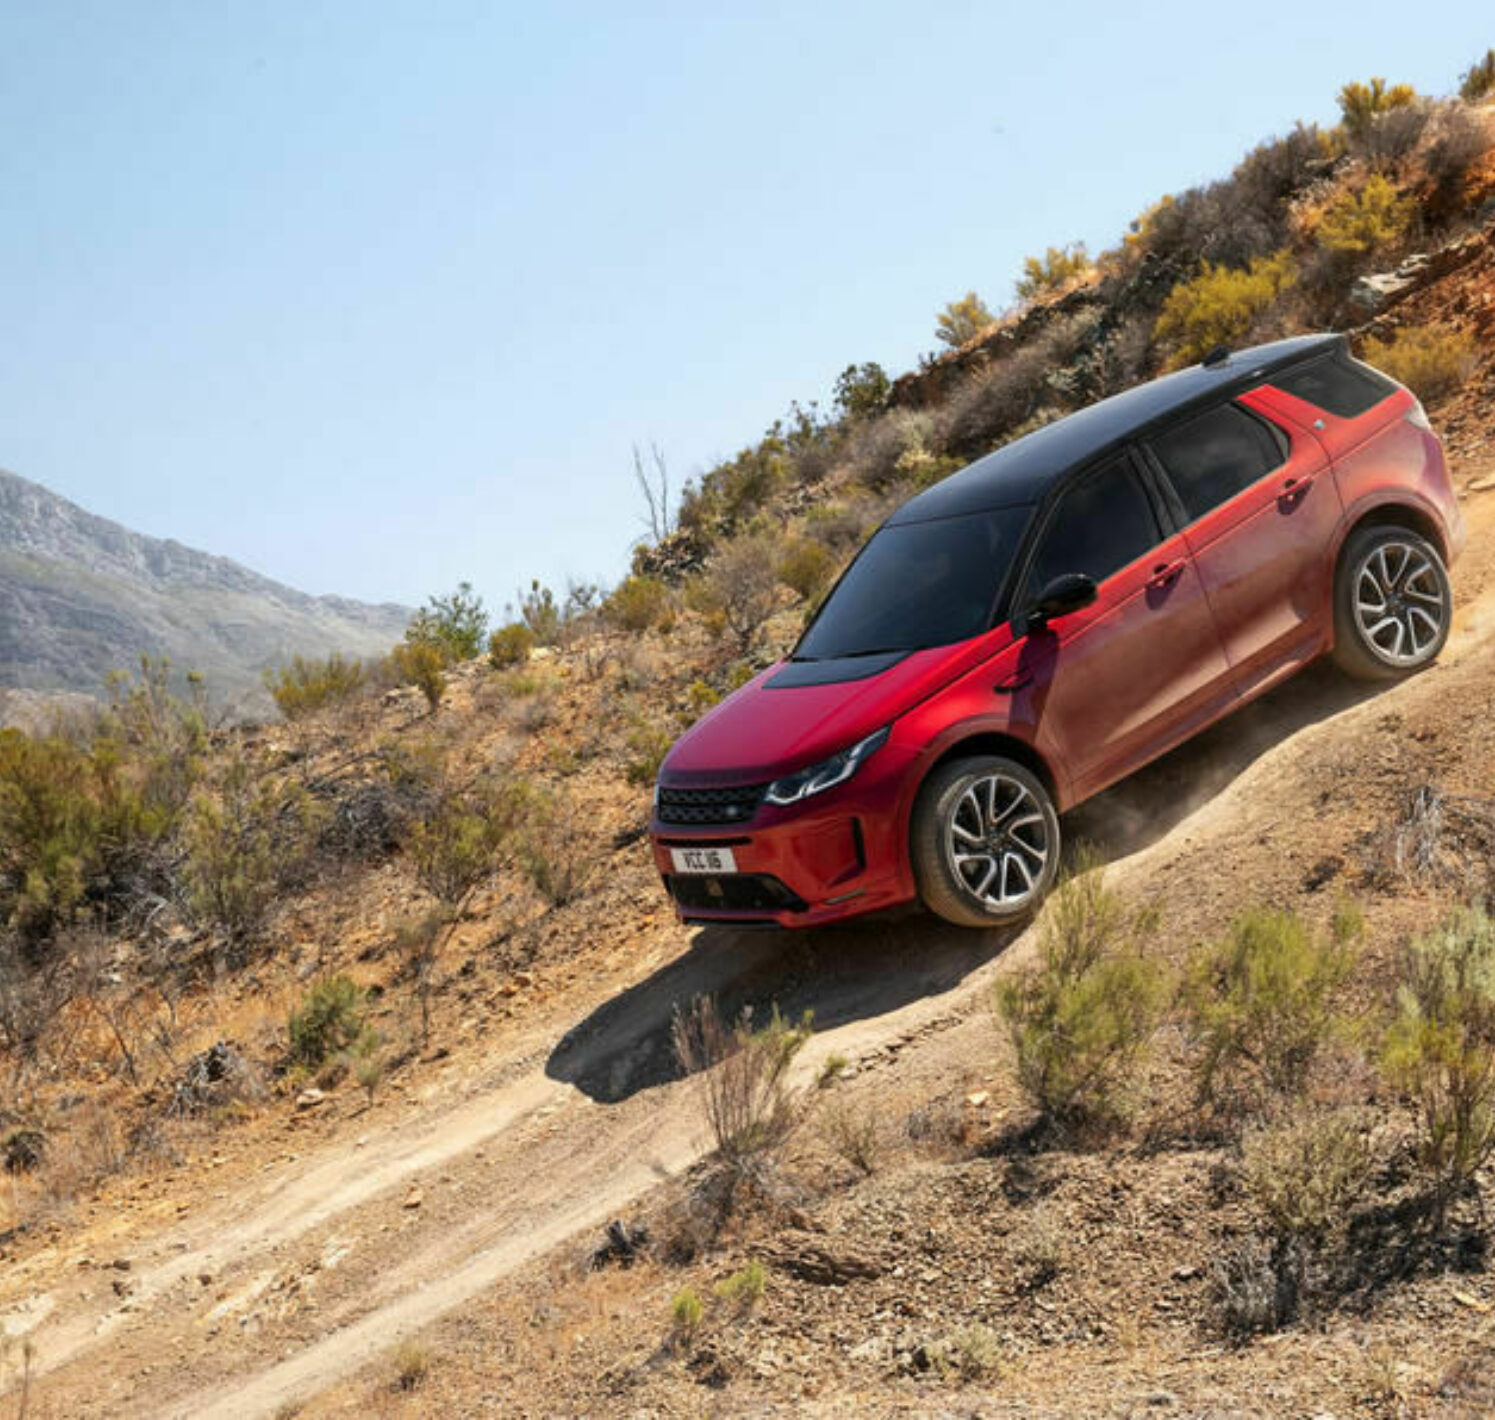 https://autofilter.sk/assets/images/discovery-sport/gallery/95-land-rover-discovery-sport-2019-official-pics-offroad-side_01-galeria.jpg - obrazok